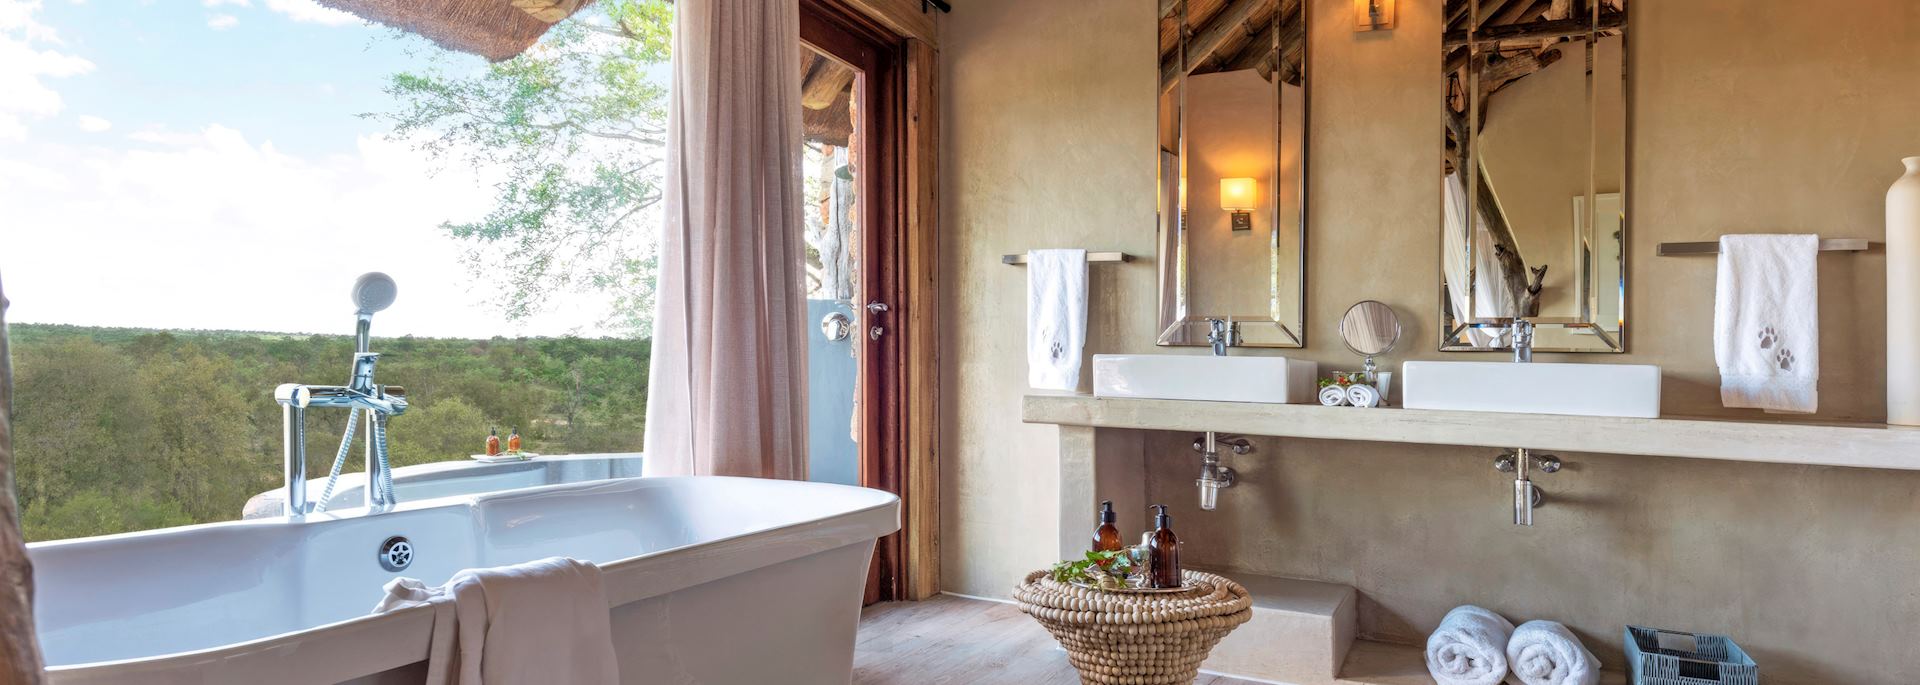 Suite bathroom at Leopard Hills Private Game Reserve